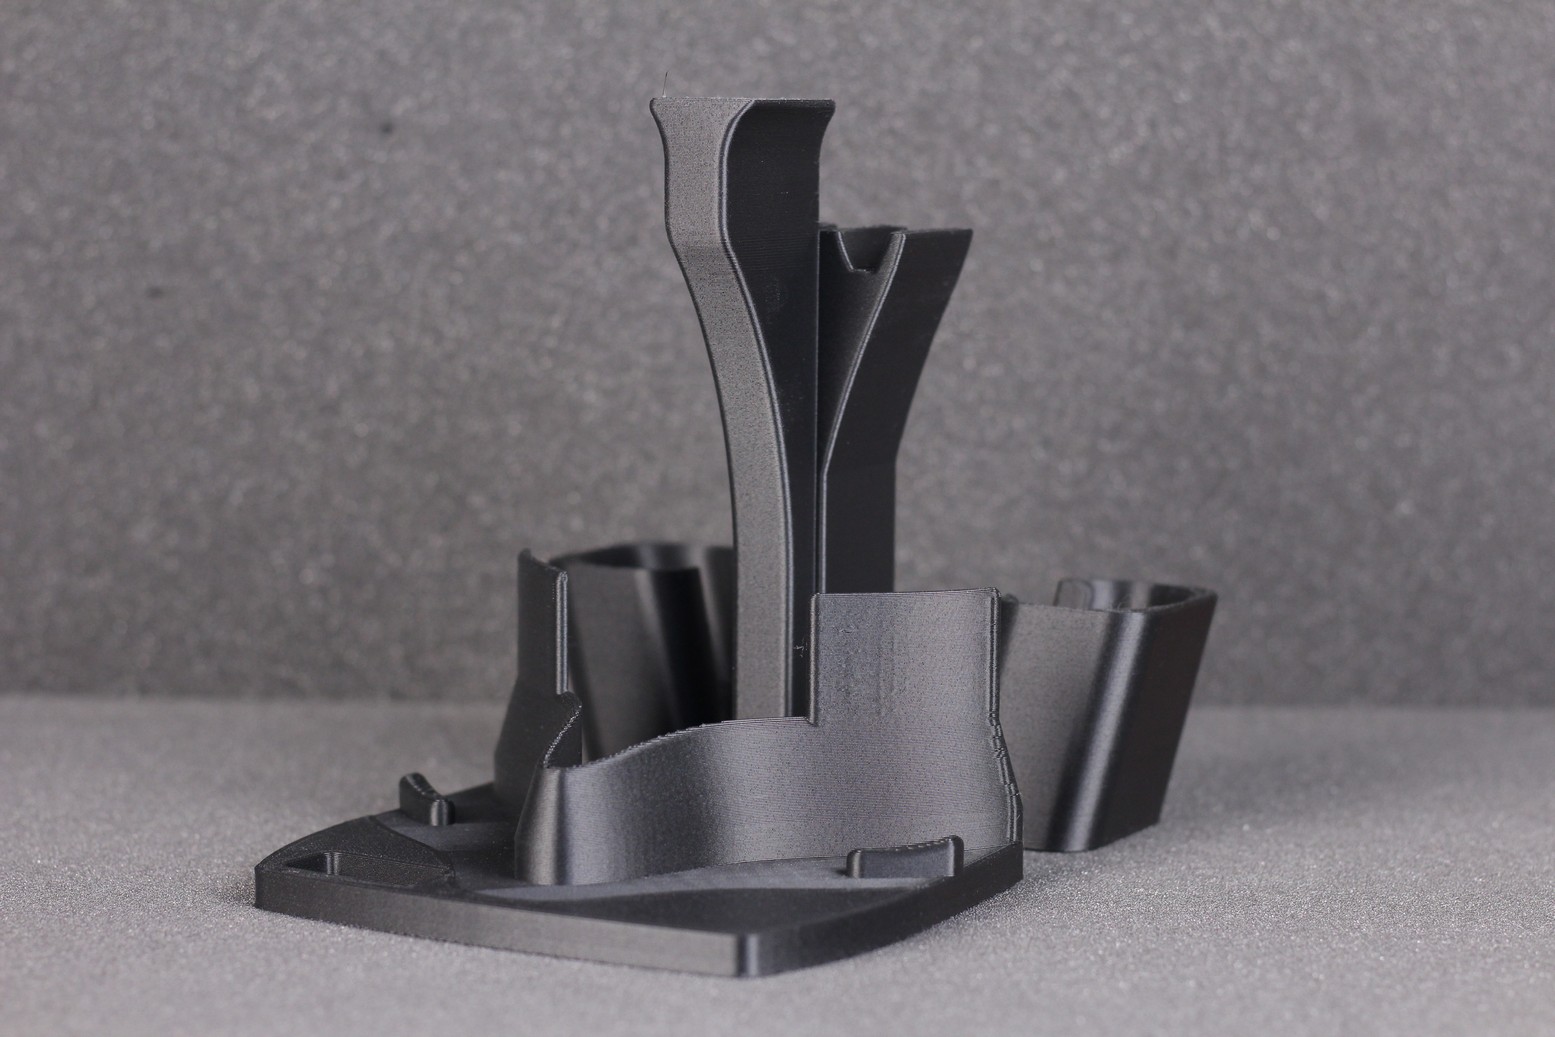 OCULUS QUEST 2 STAND printed on V Core 3 2 | RatRig V-Core 3 Review: Premium CoreXY 3D Printer Kit